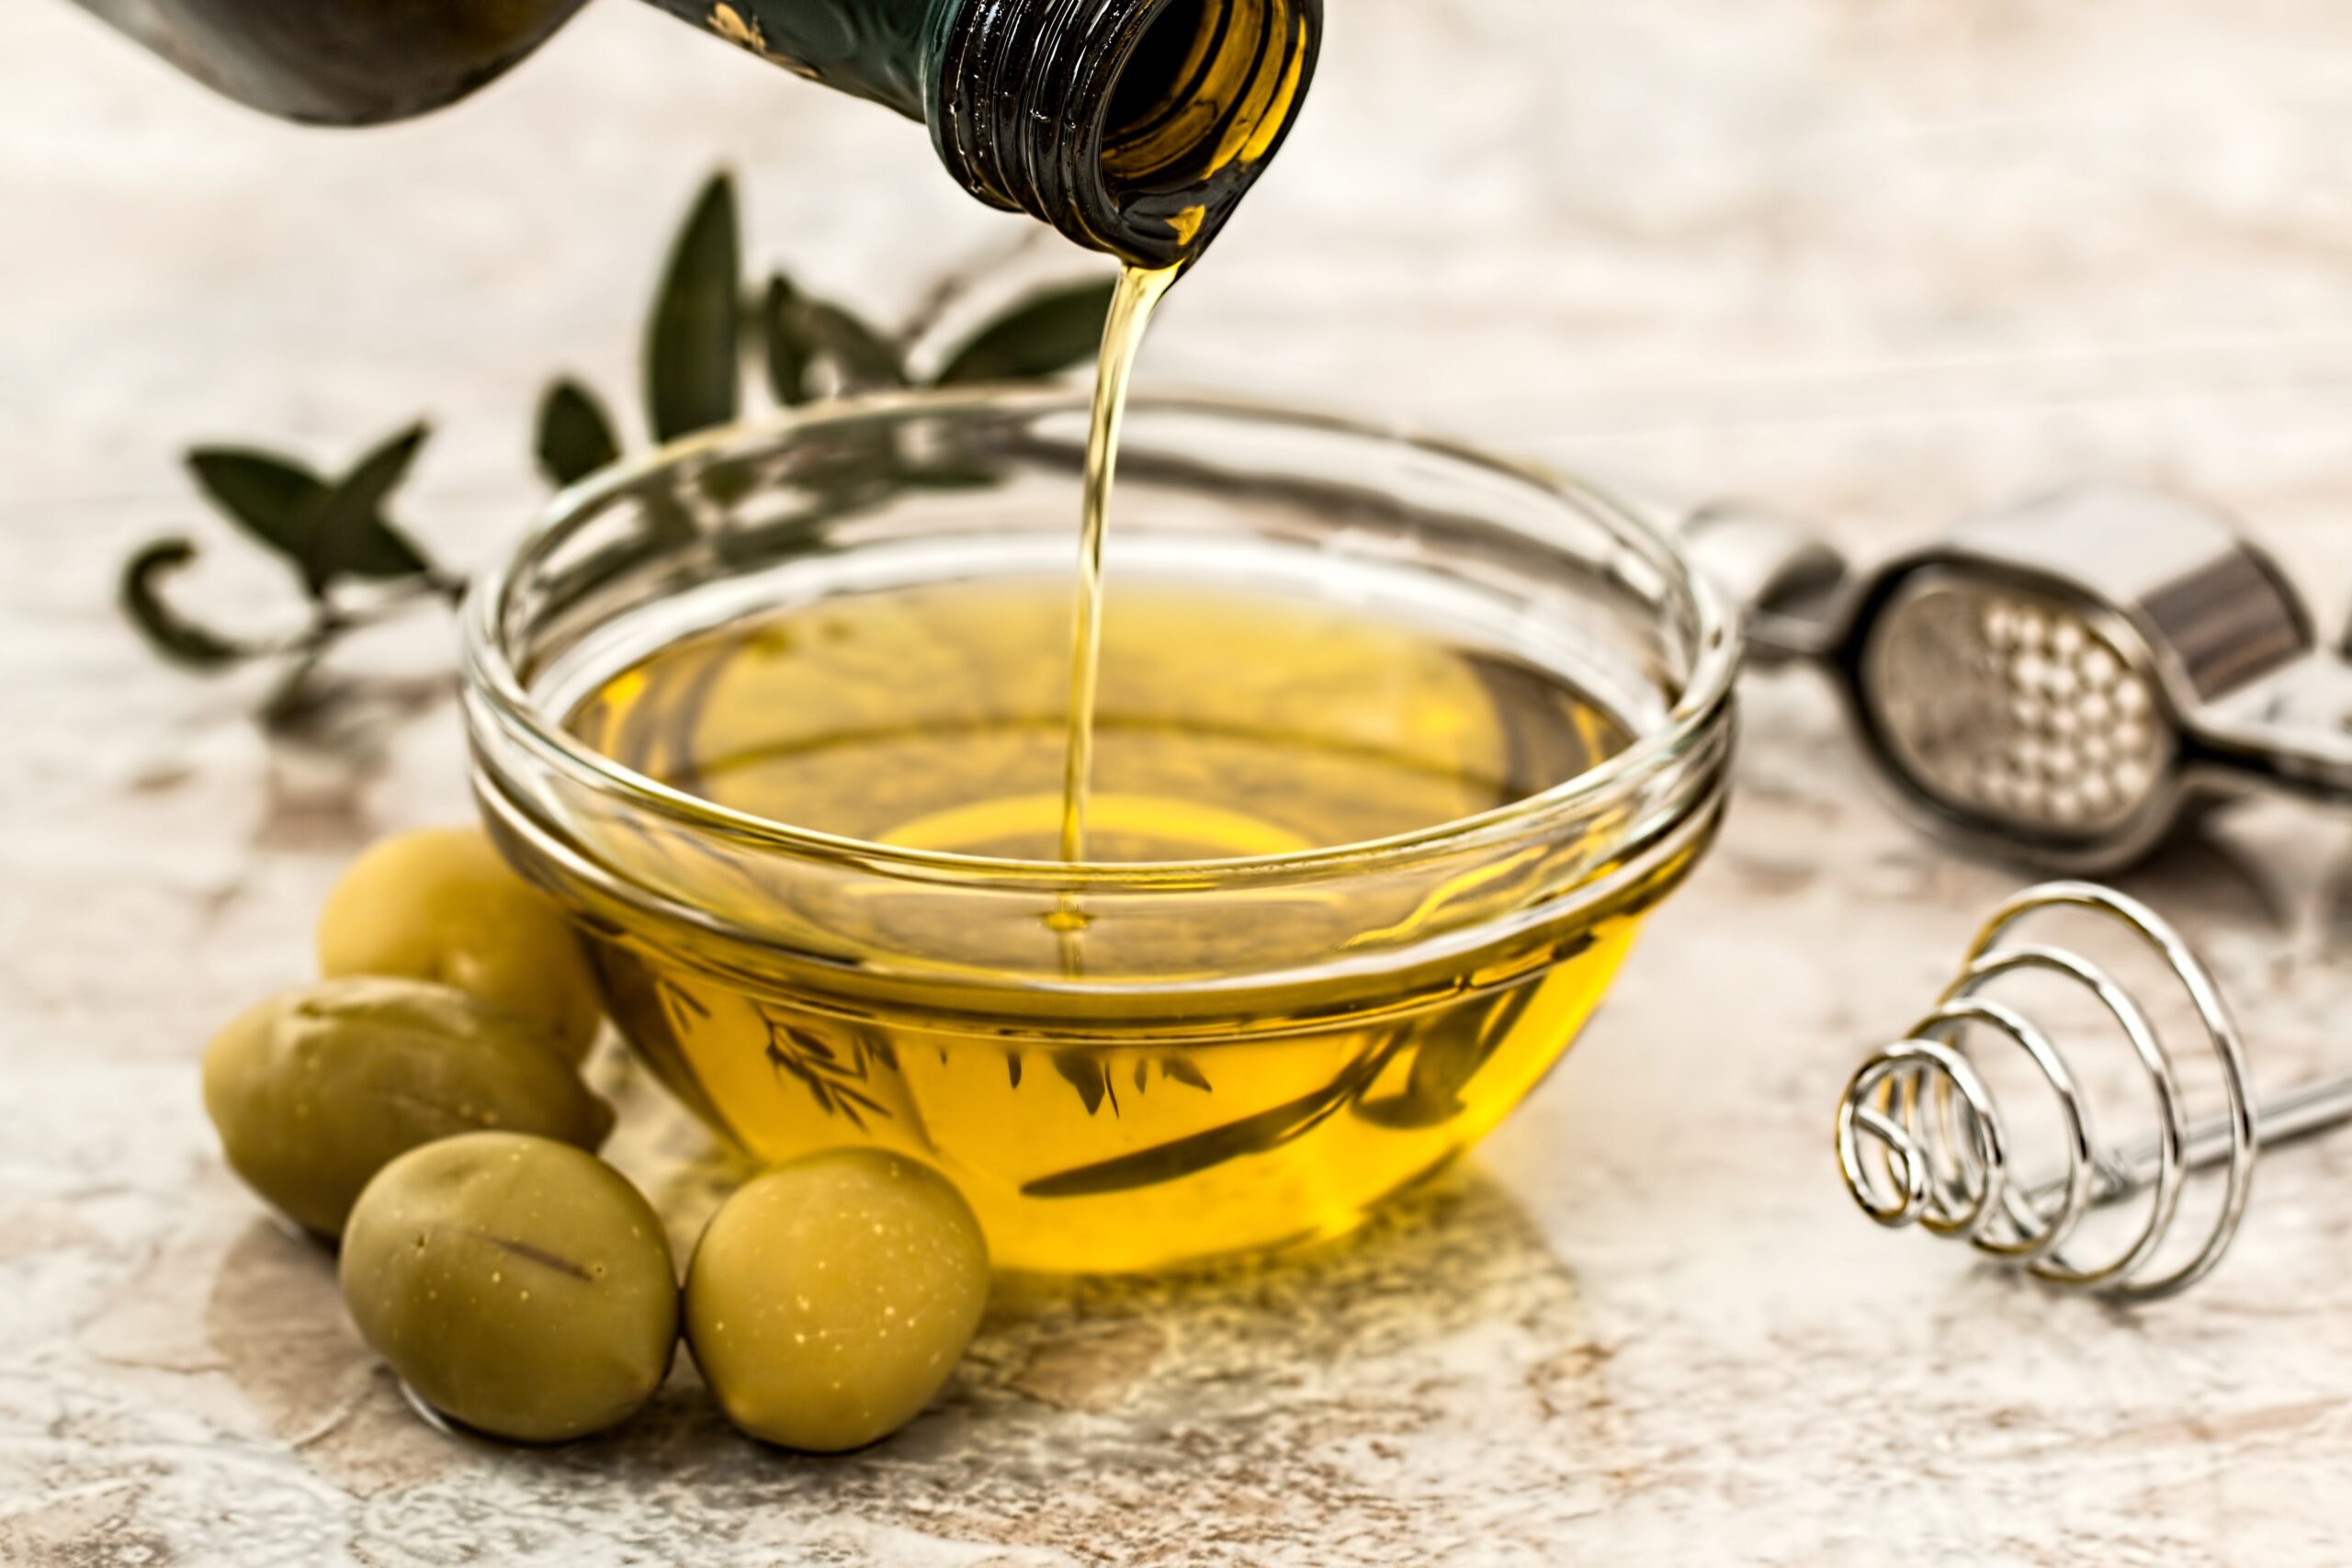 EXTRA VIRGIN OLIVE OIL: HIGHT SICILIAN QUALITY